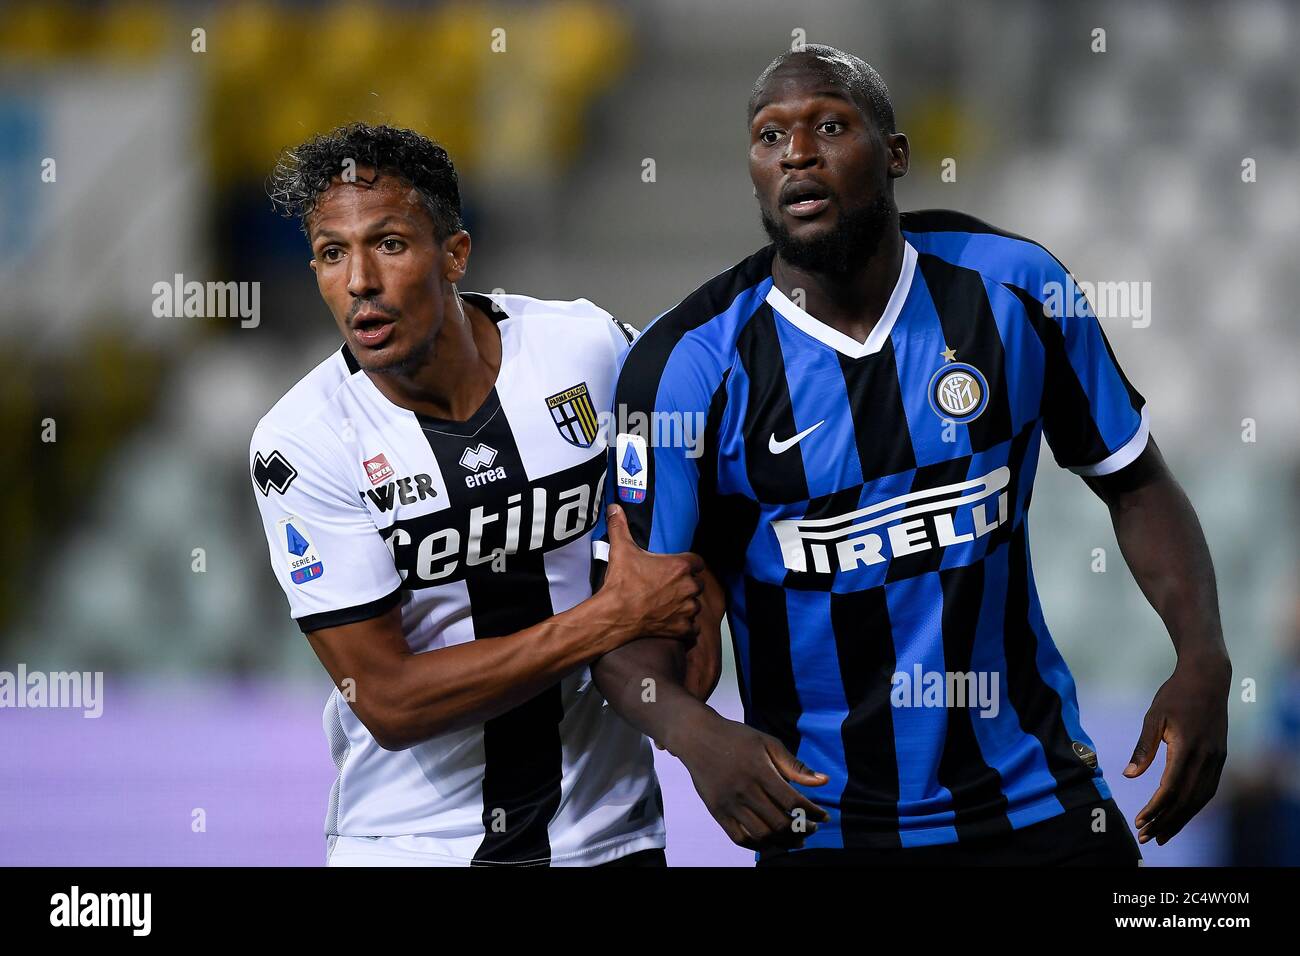 Parma, Italy. 28th June, 2020. PARMA, ITALY - June 28, 2020: Romelu Lukaku (R) of FC Internazionale comptes with Bruno Alves of Parma Calcio during the Serie A football match between Parma Calcio and FC Internazionale. (Photo by Nicolò Campo/Sipa USA) Credit: Sipa USA/Alamy Live News Stock Photo